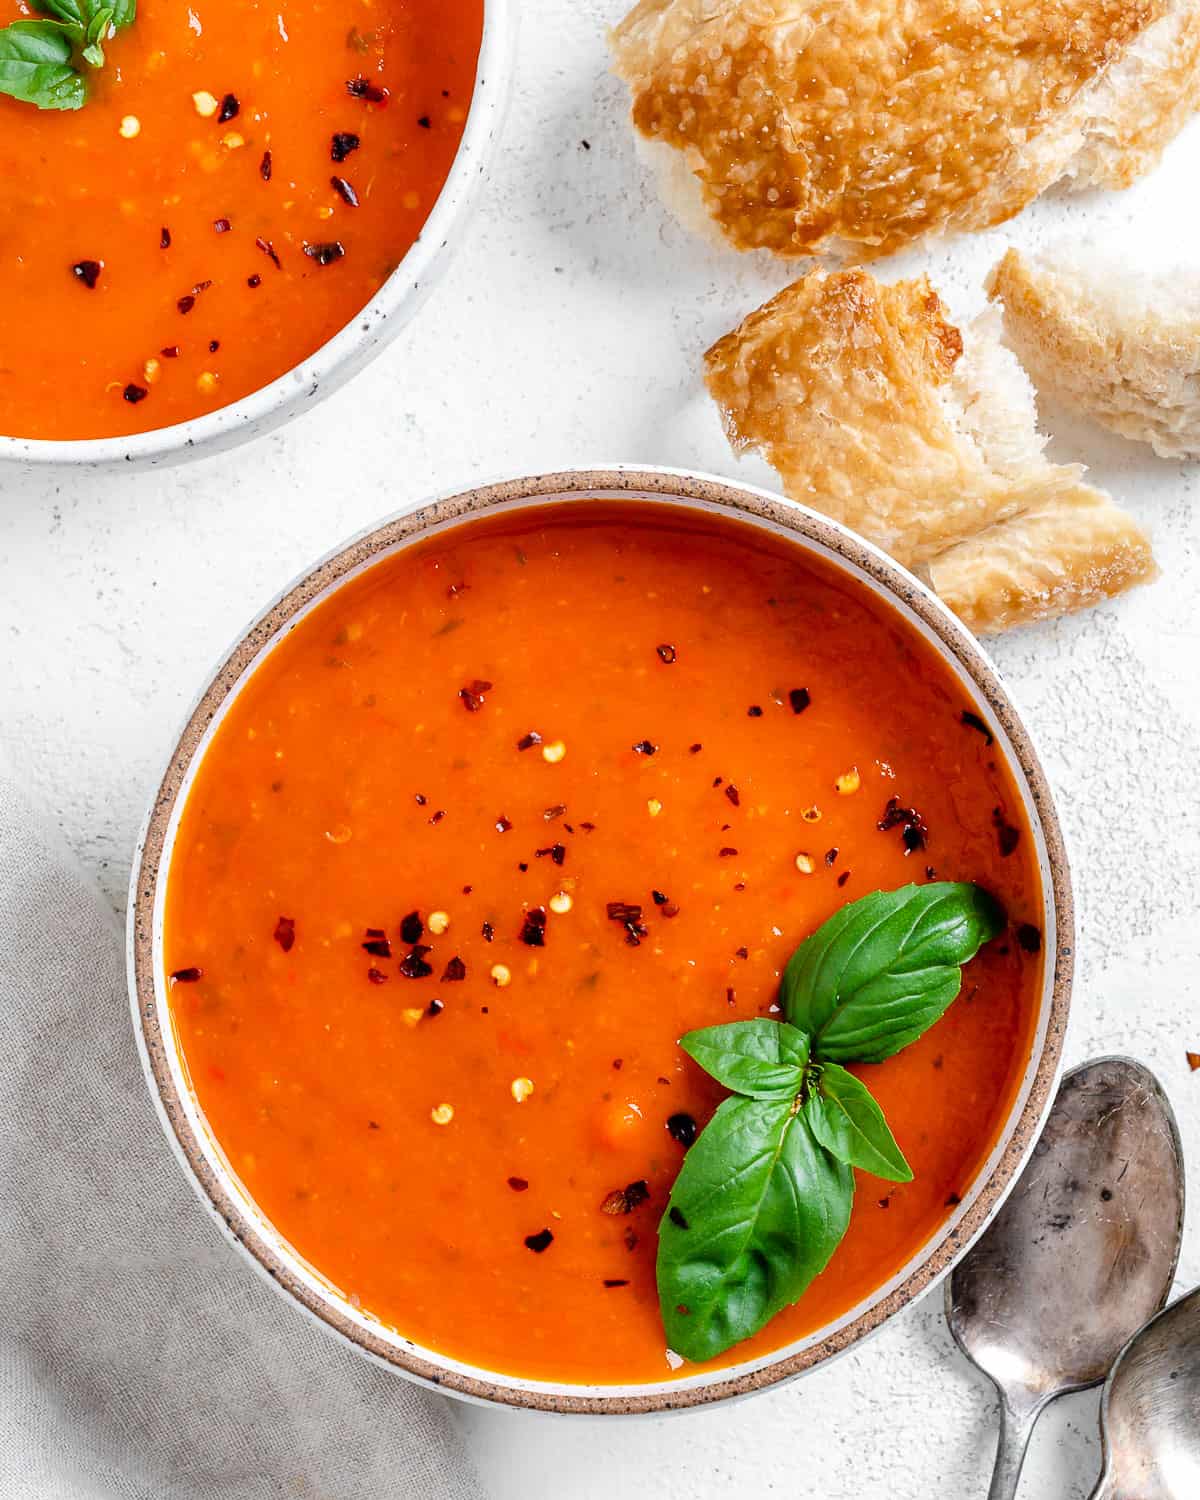 completed Tomato Basil Soup in a bowl against a light surface with ingredients in the background